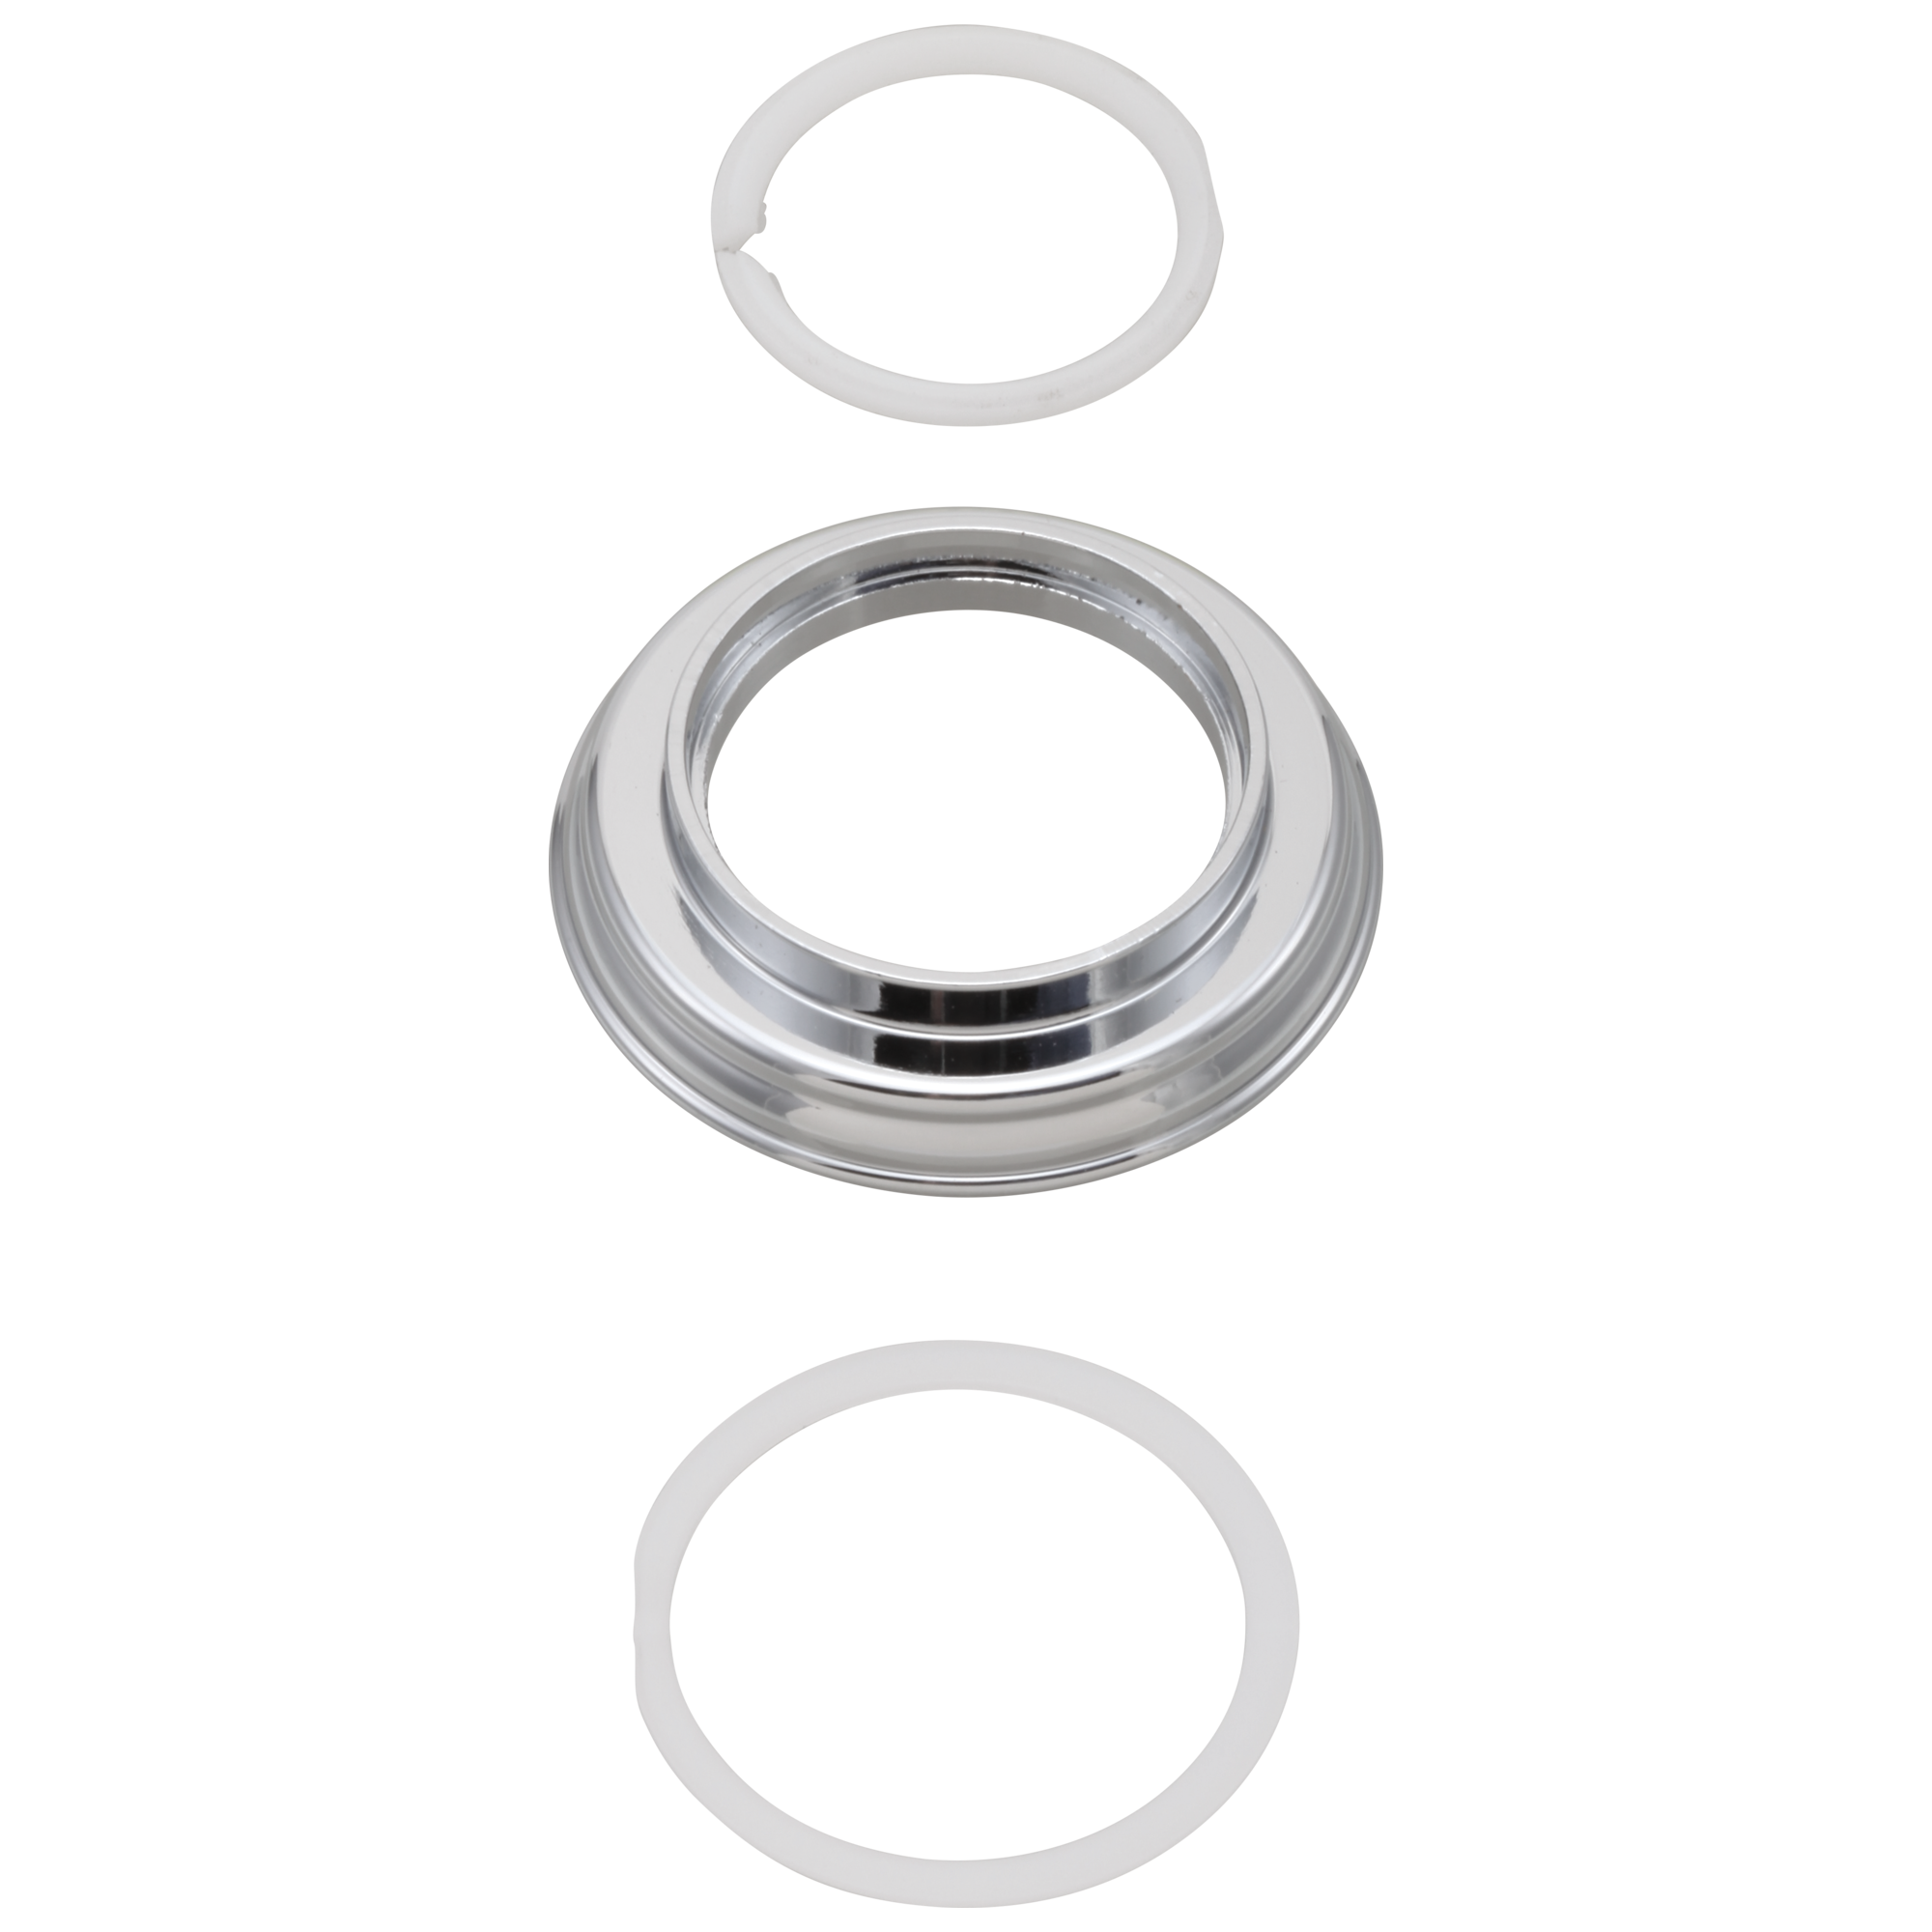 Delta RP26146 Innovations Handle Base, Snap Ring and Gasket